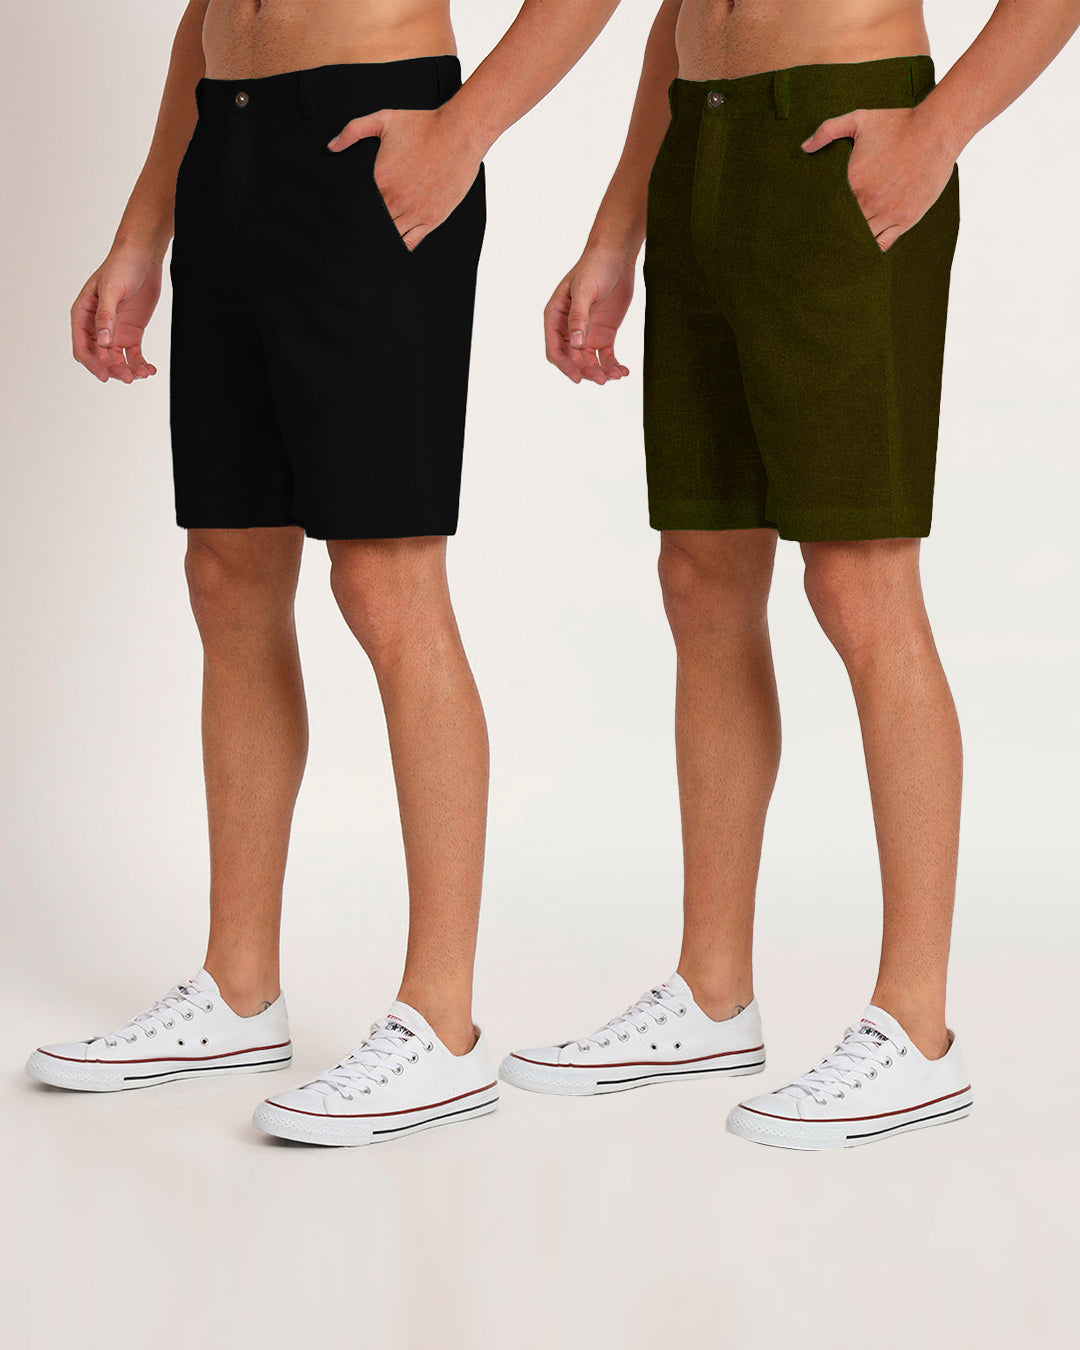 Combo : Ready For Anything Black & Olive Green Men's Shorts